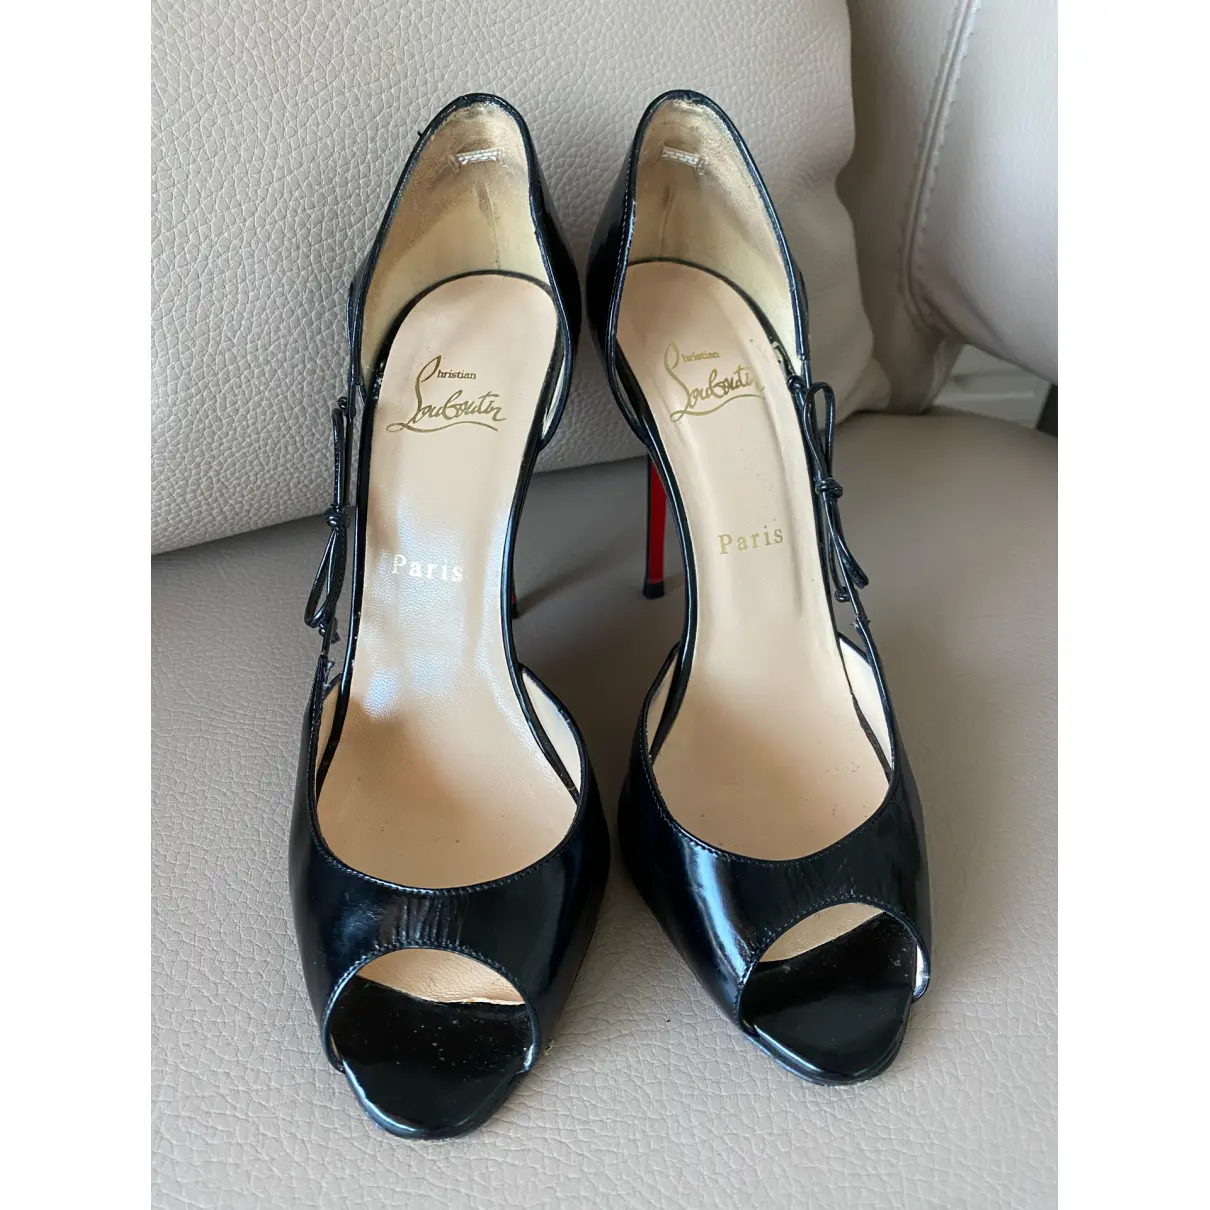 Buy Christian Louboutin Patent leather sandals online